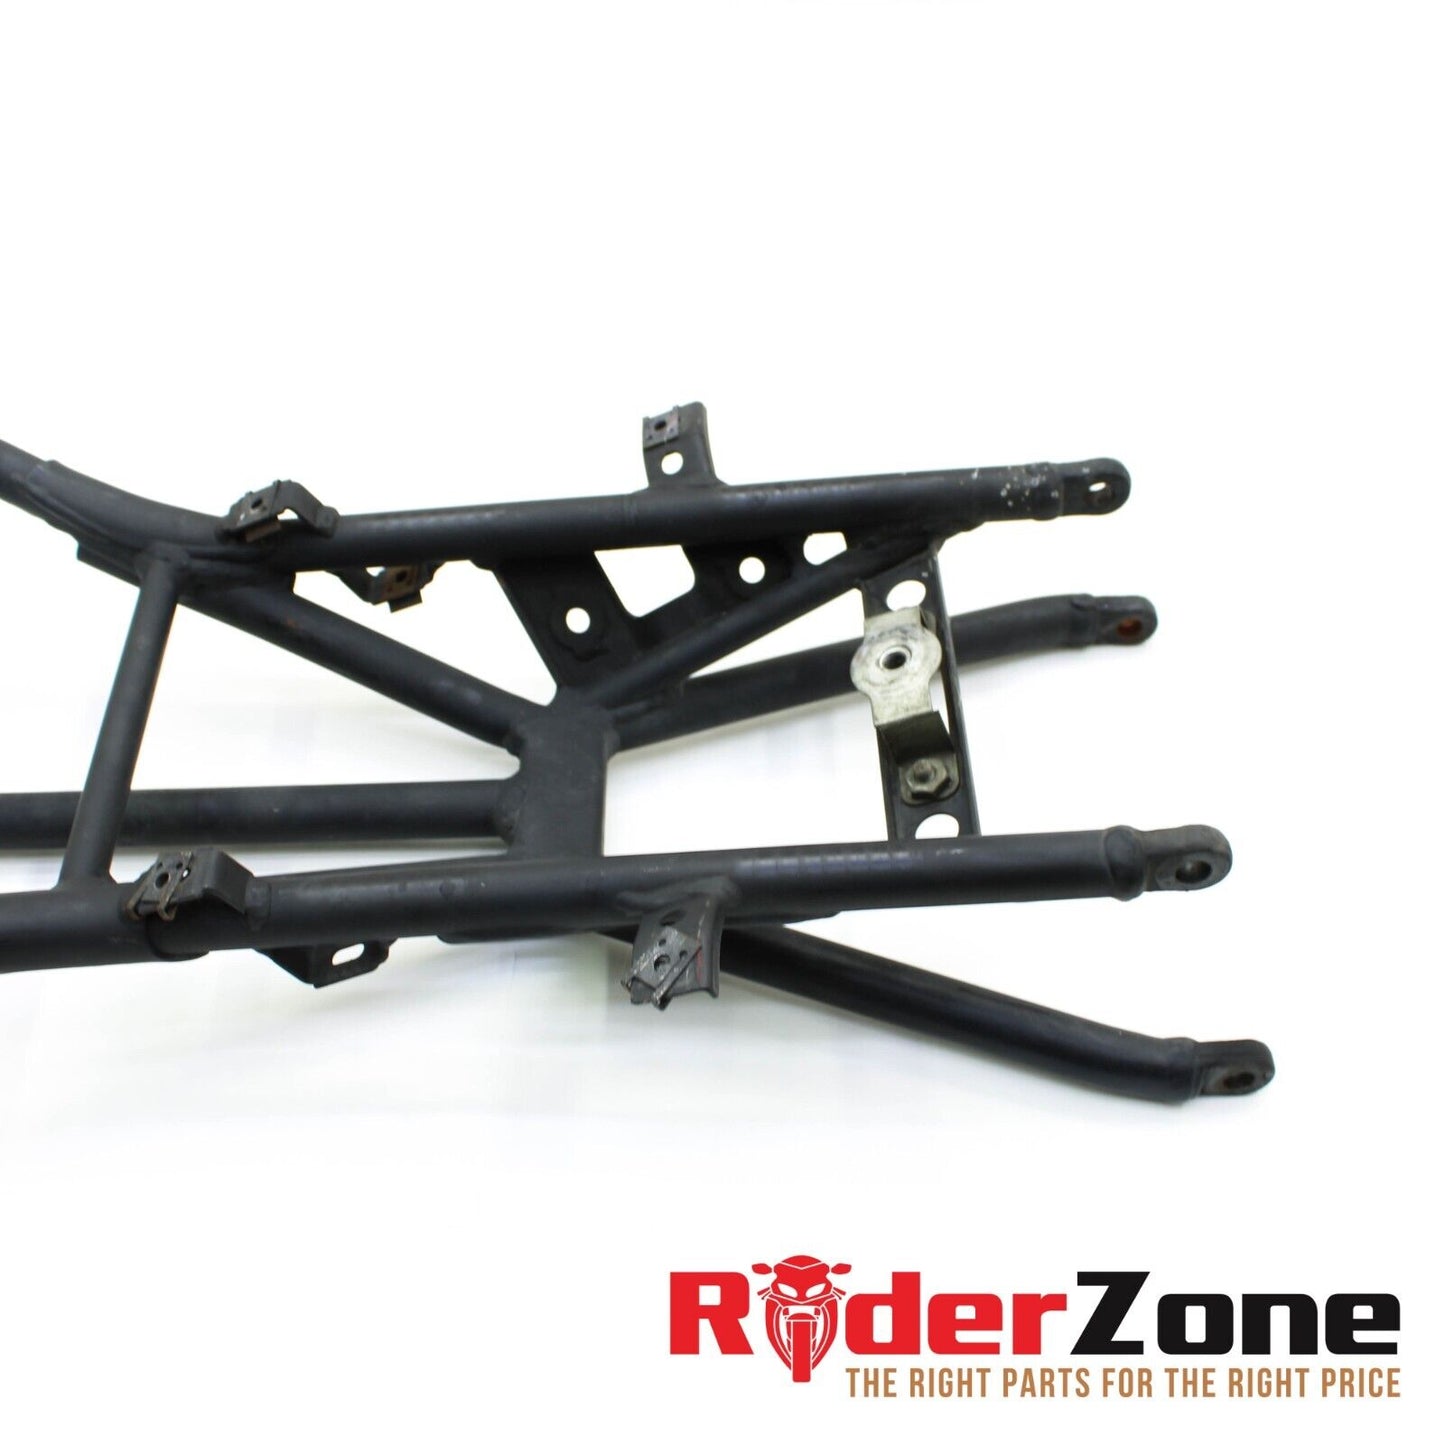 2008 - 2013 DUCATI 848 EVO SUBFRAME REAR SEAT SUPPORT SUB FRAME TAIL STOCK